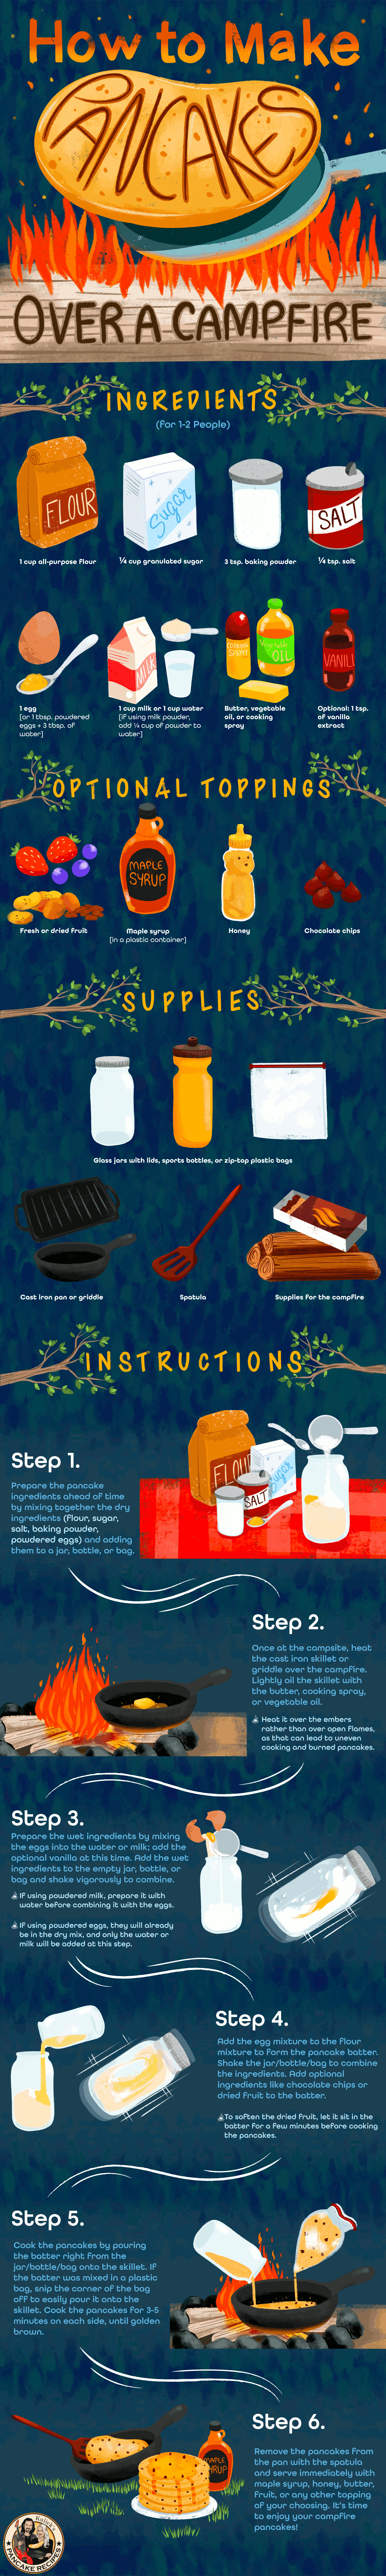 How to Make Pancakes Using a Campfire